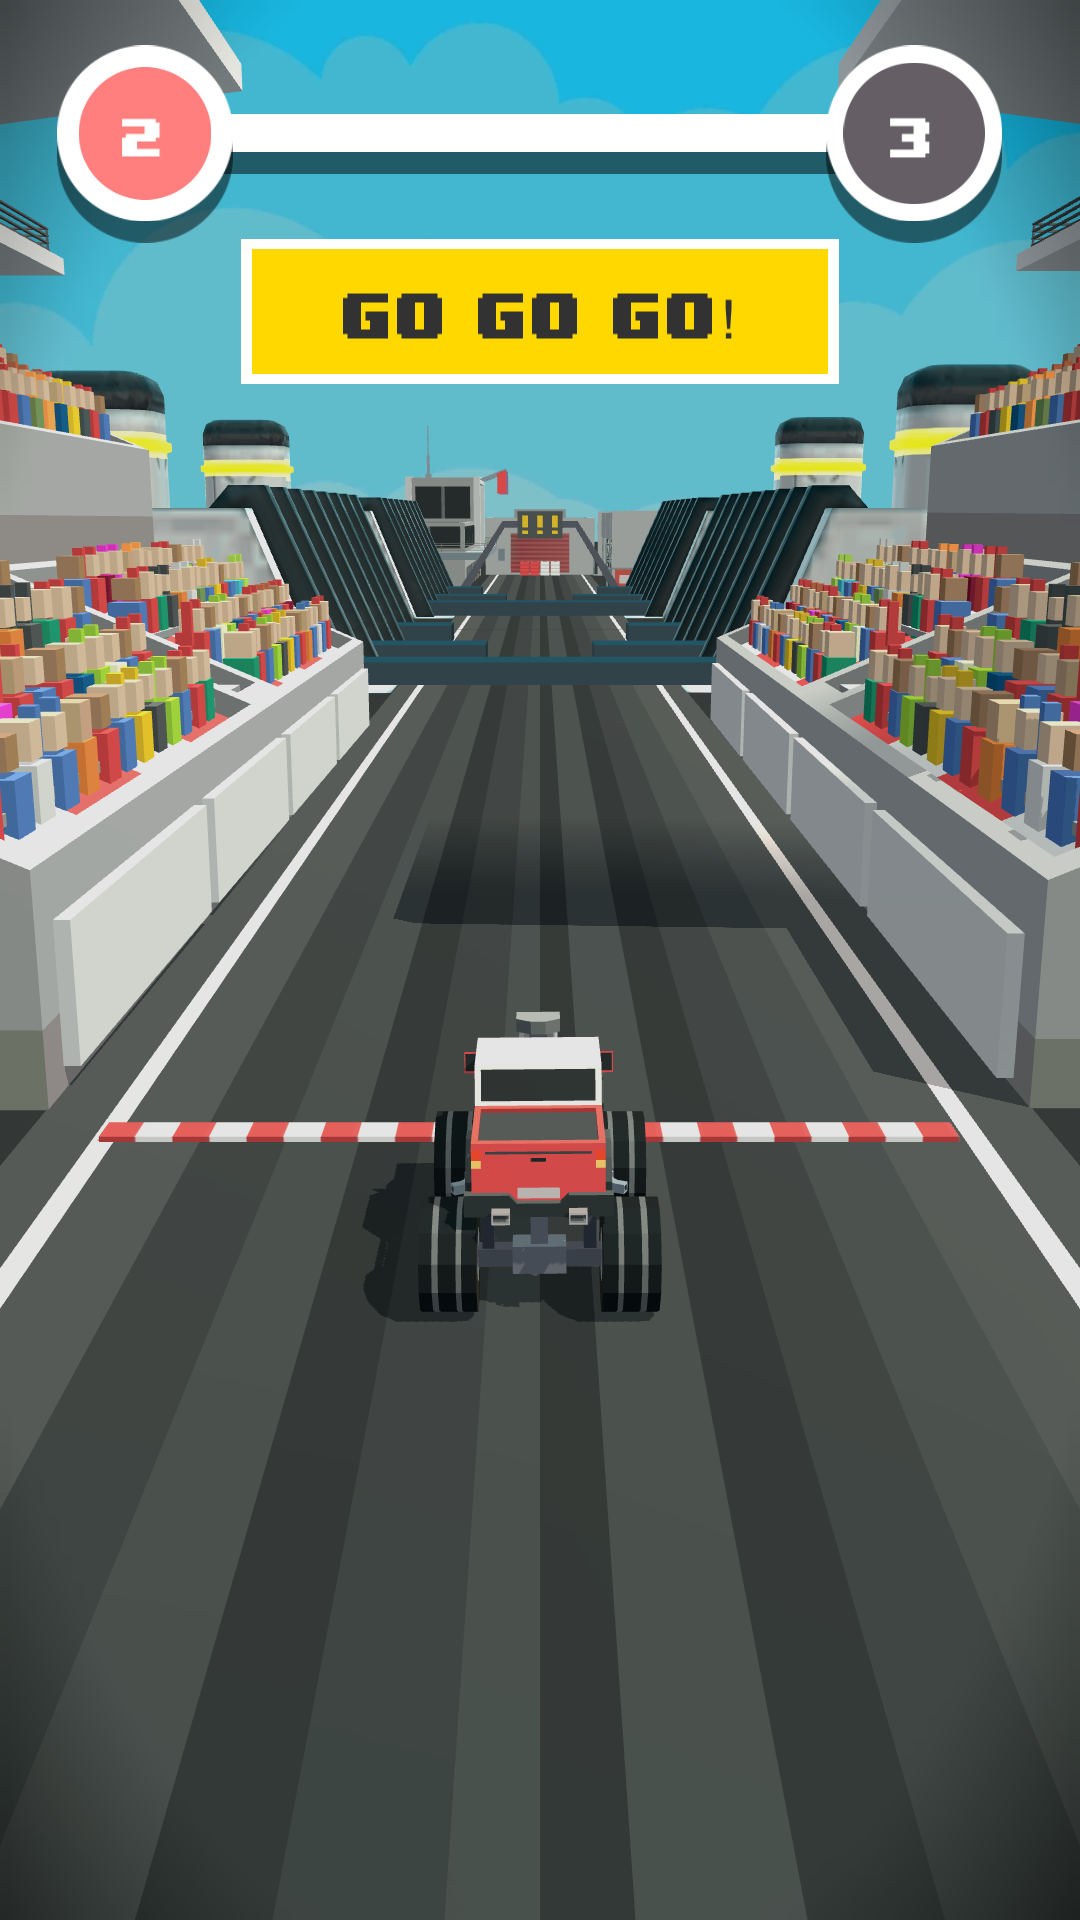 How to Download RCC - Real Car Crash Simulator on Android